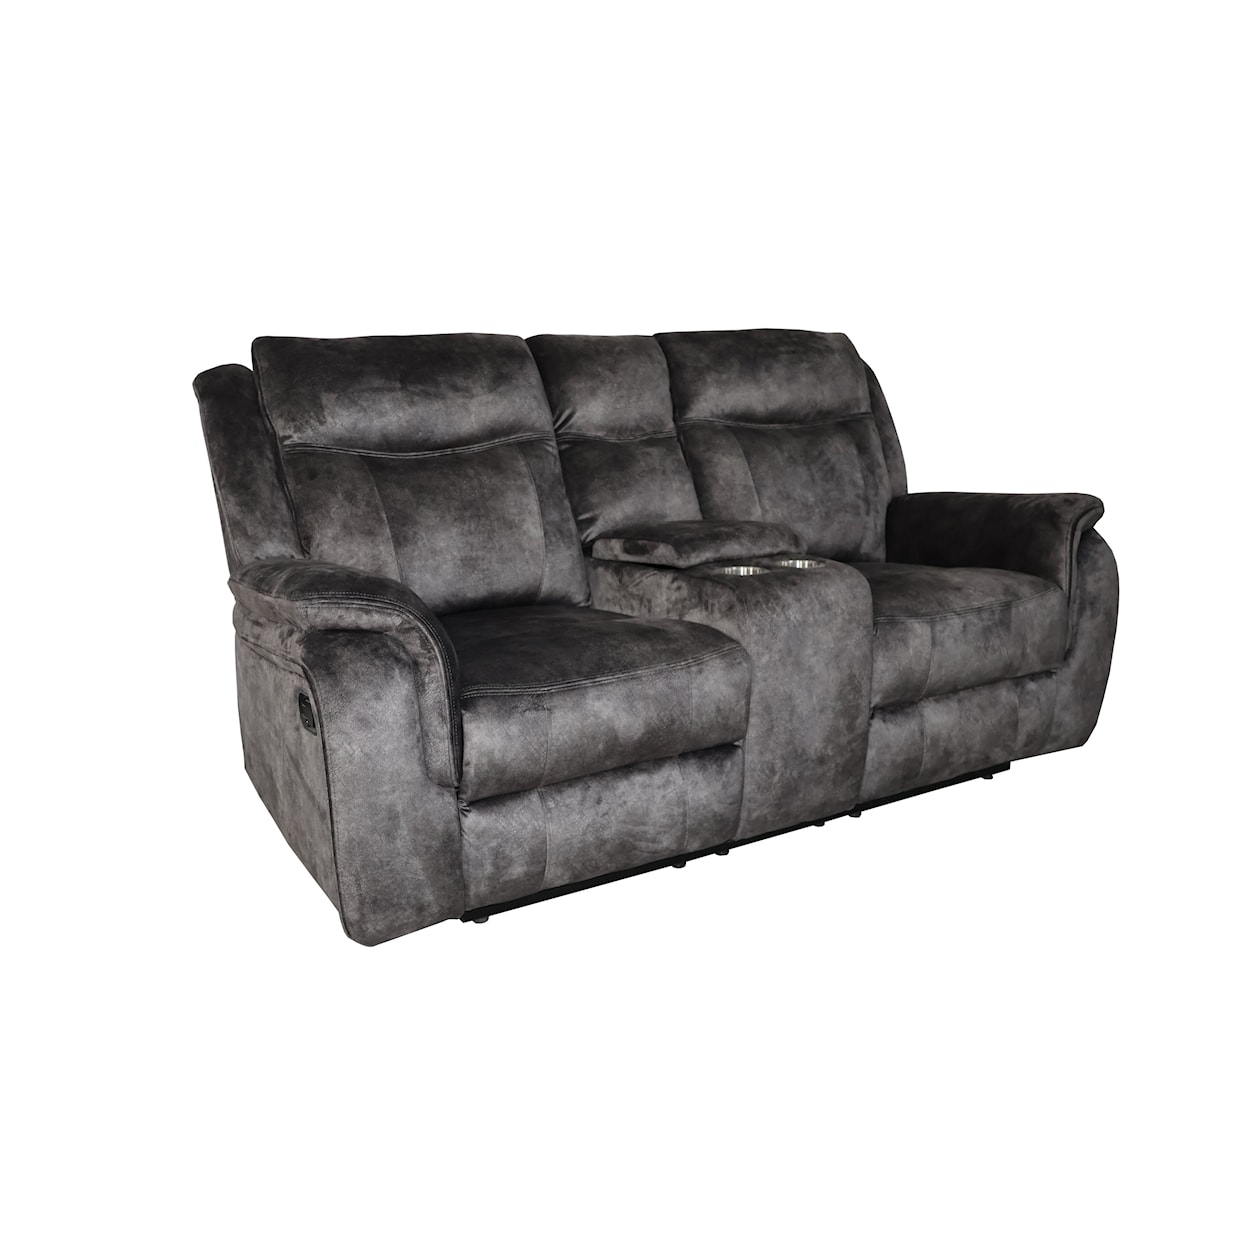 New Classic Furniture Park City Upholstered Dual Reclining Loveseat